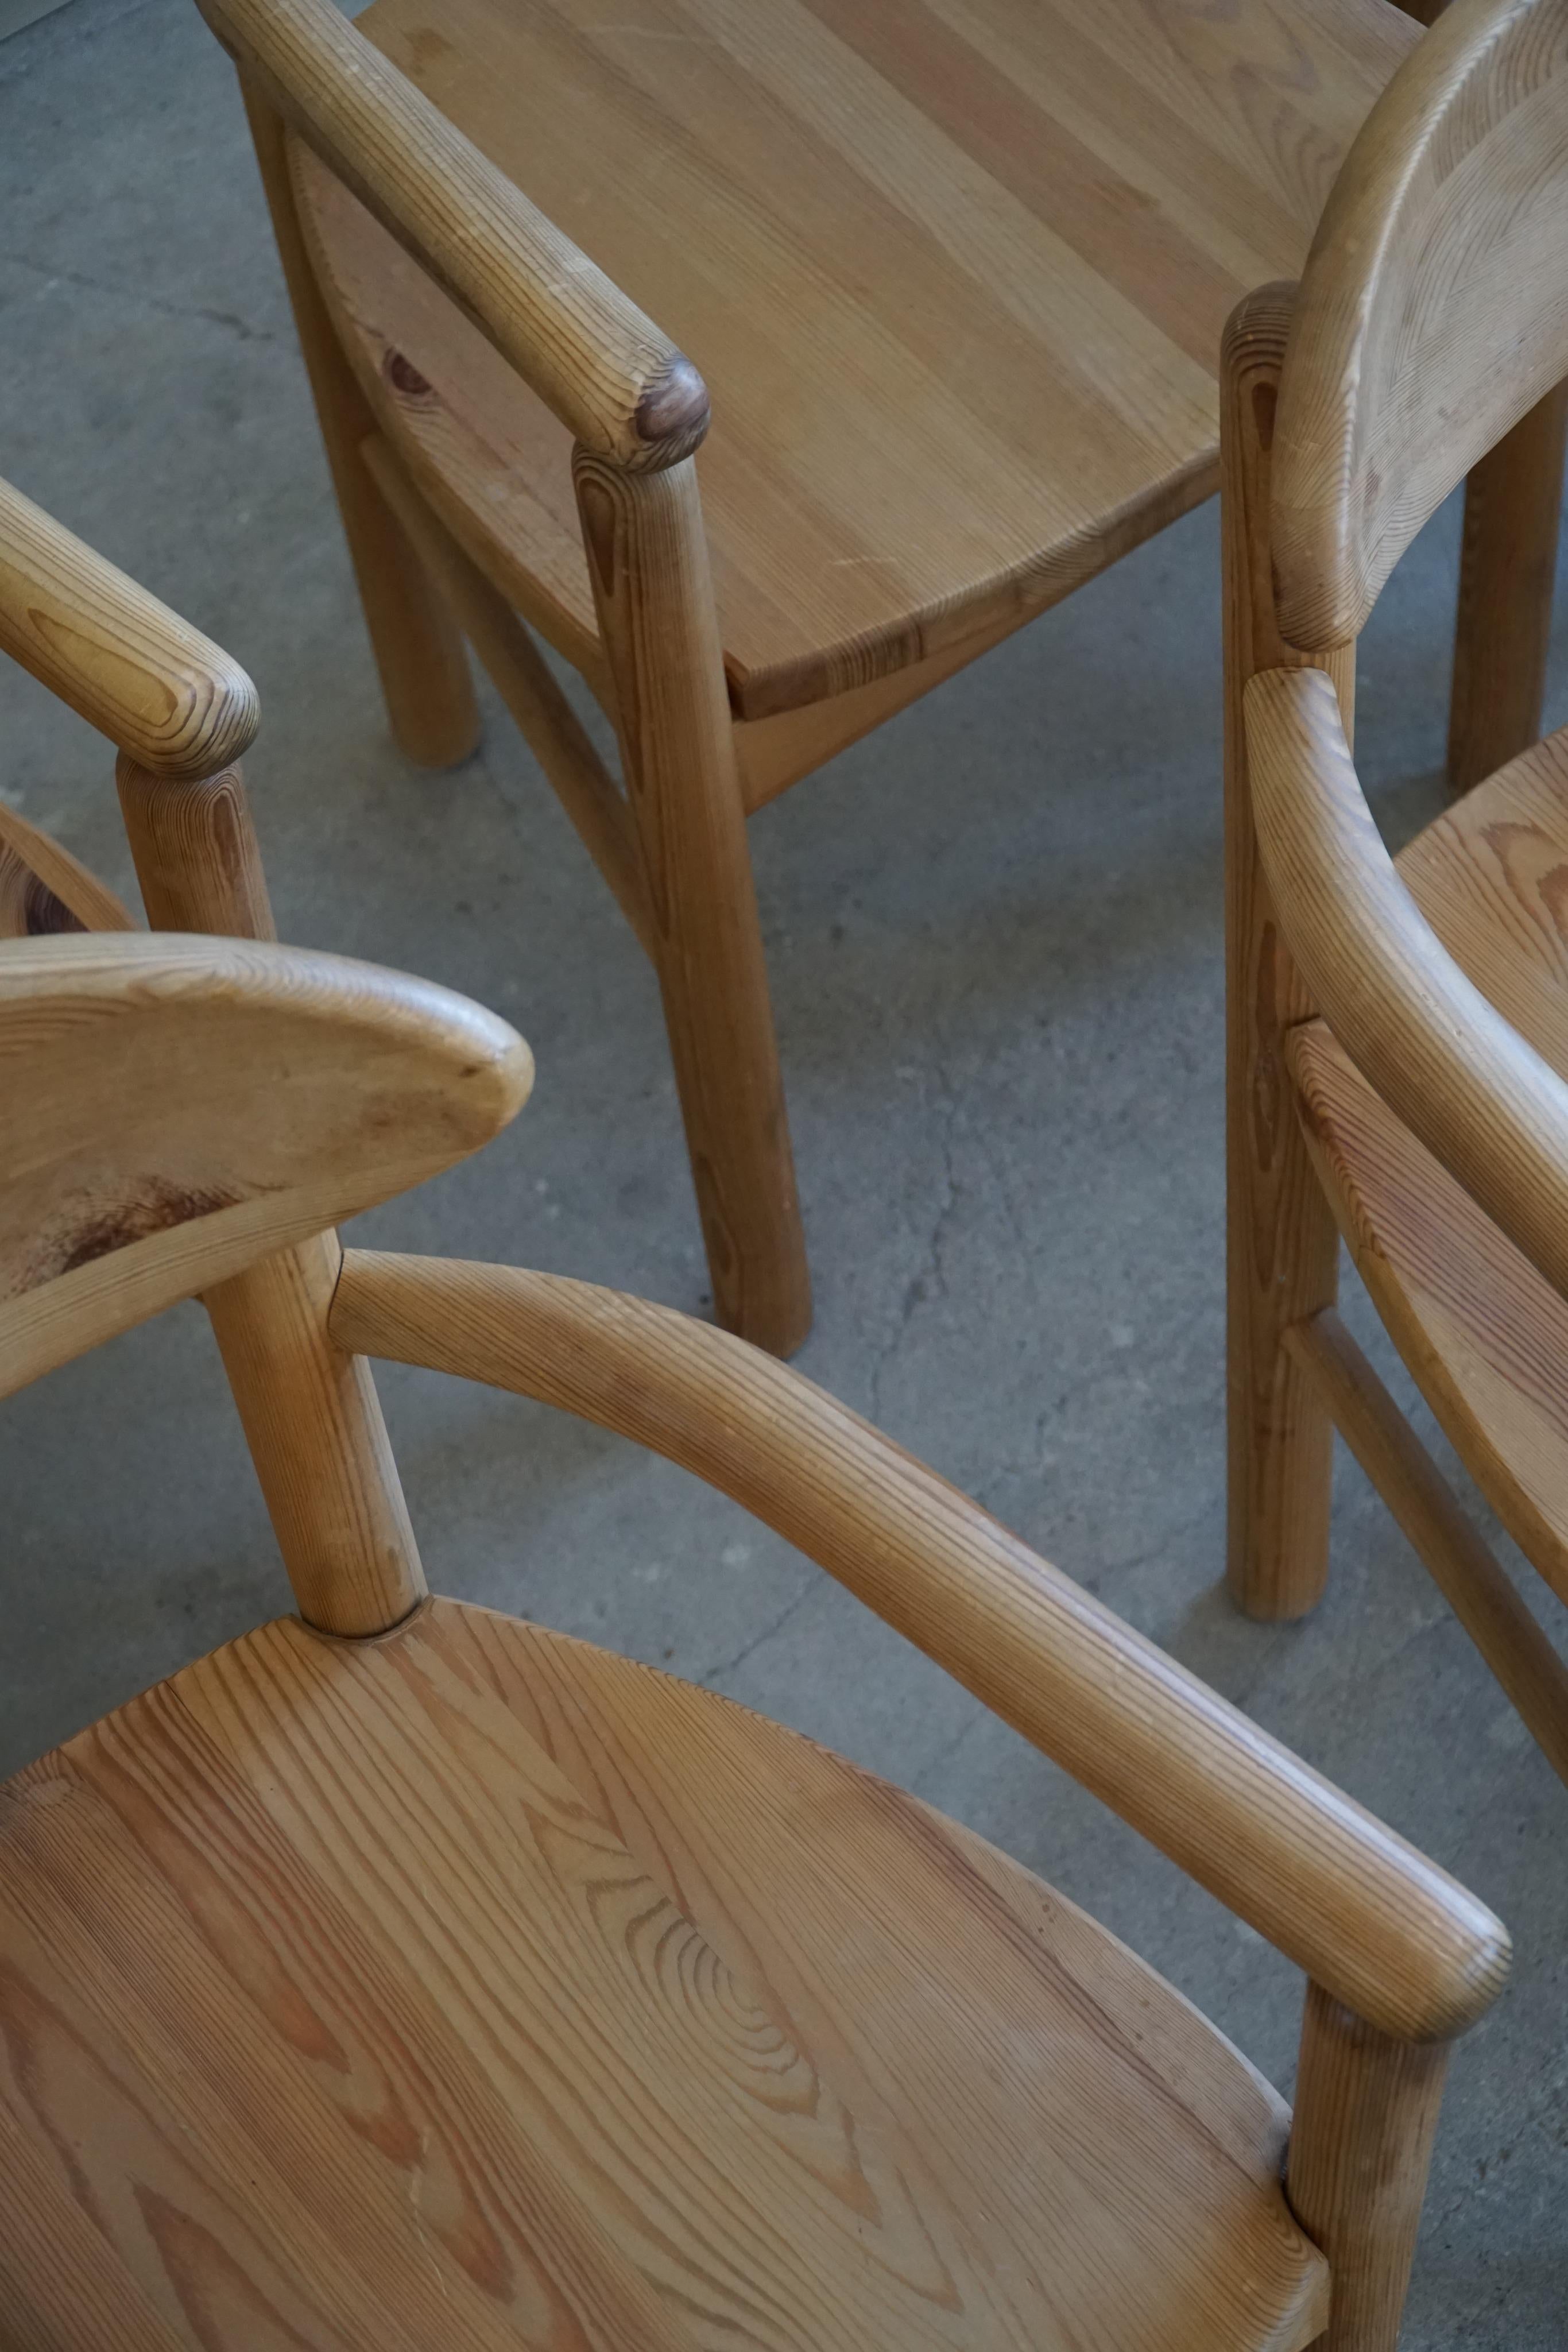 Set of 6 Dining Chairs in Solid Pine, Rainer Daumiller, Danish Modern, 1970s For Sale 9